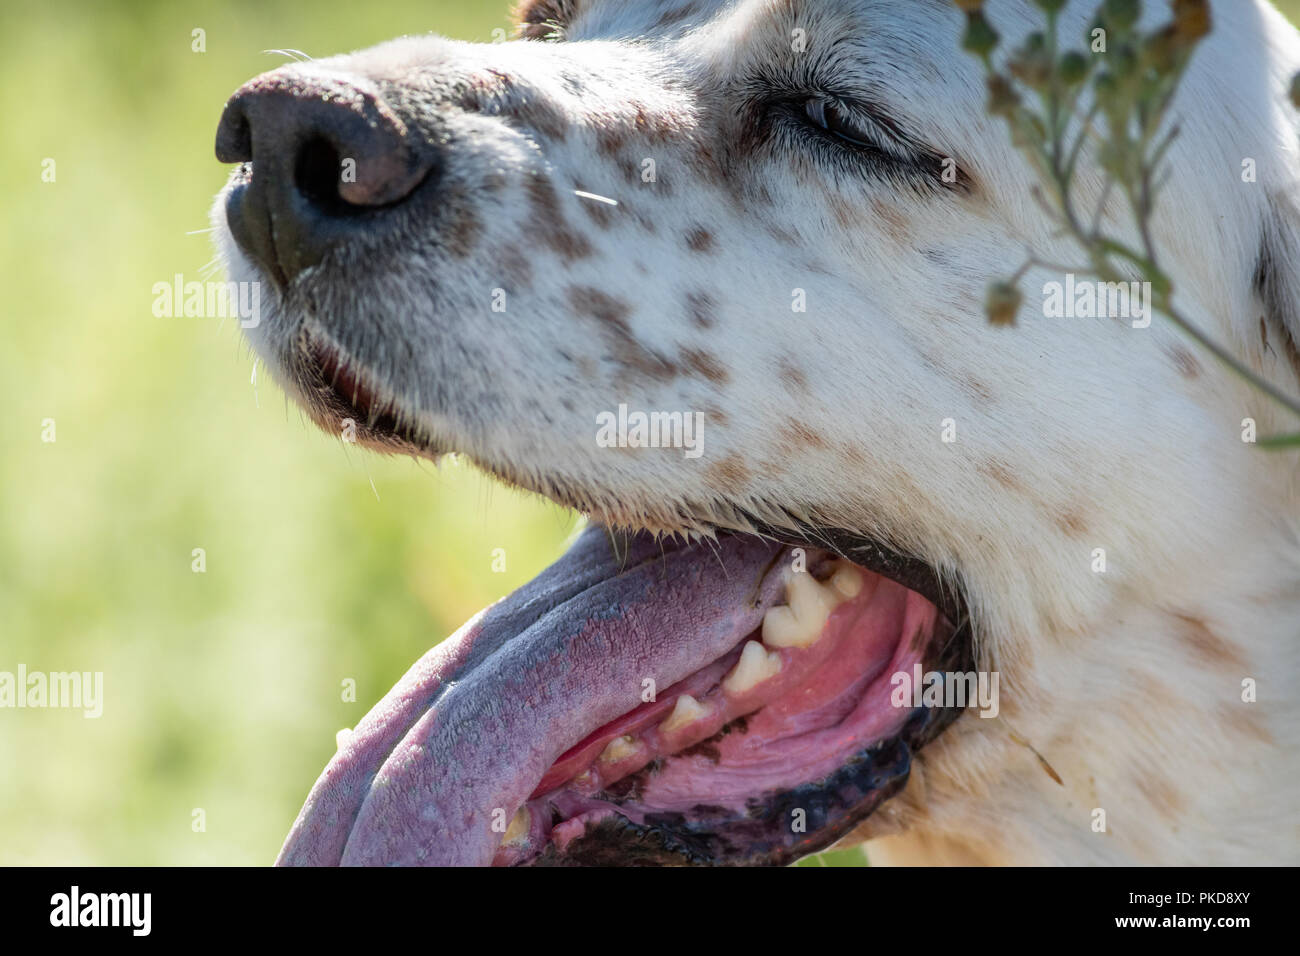 Profile view of Pointer dog head with tongue out Stock Photo